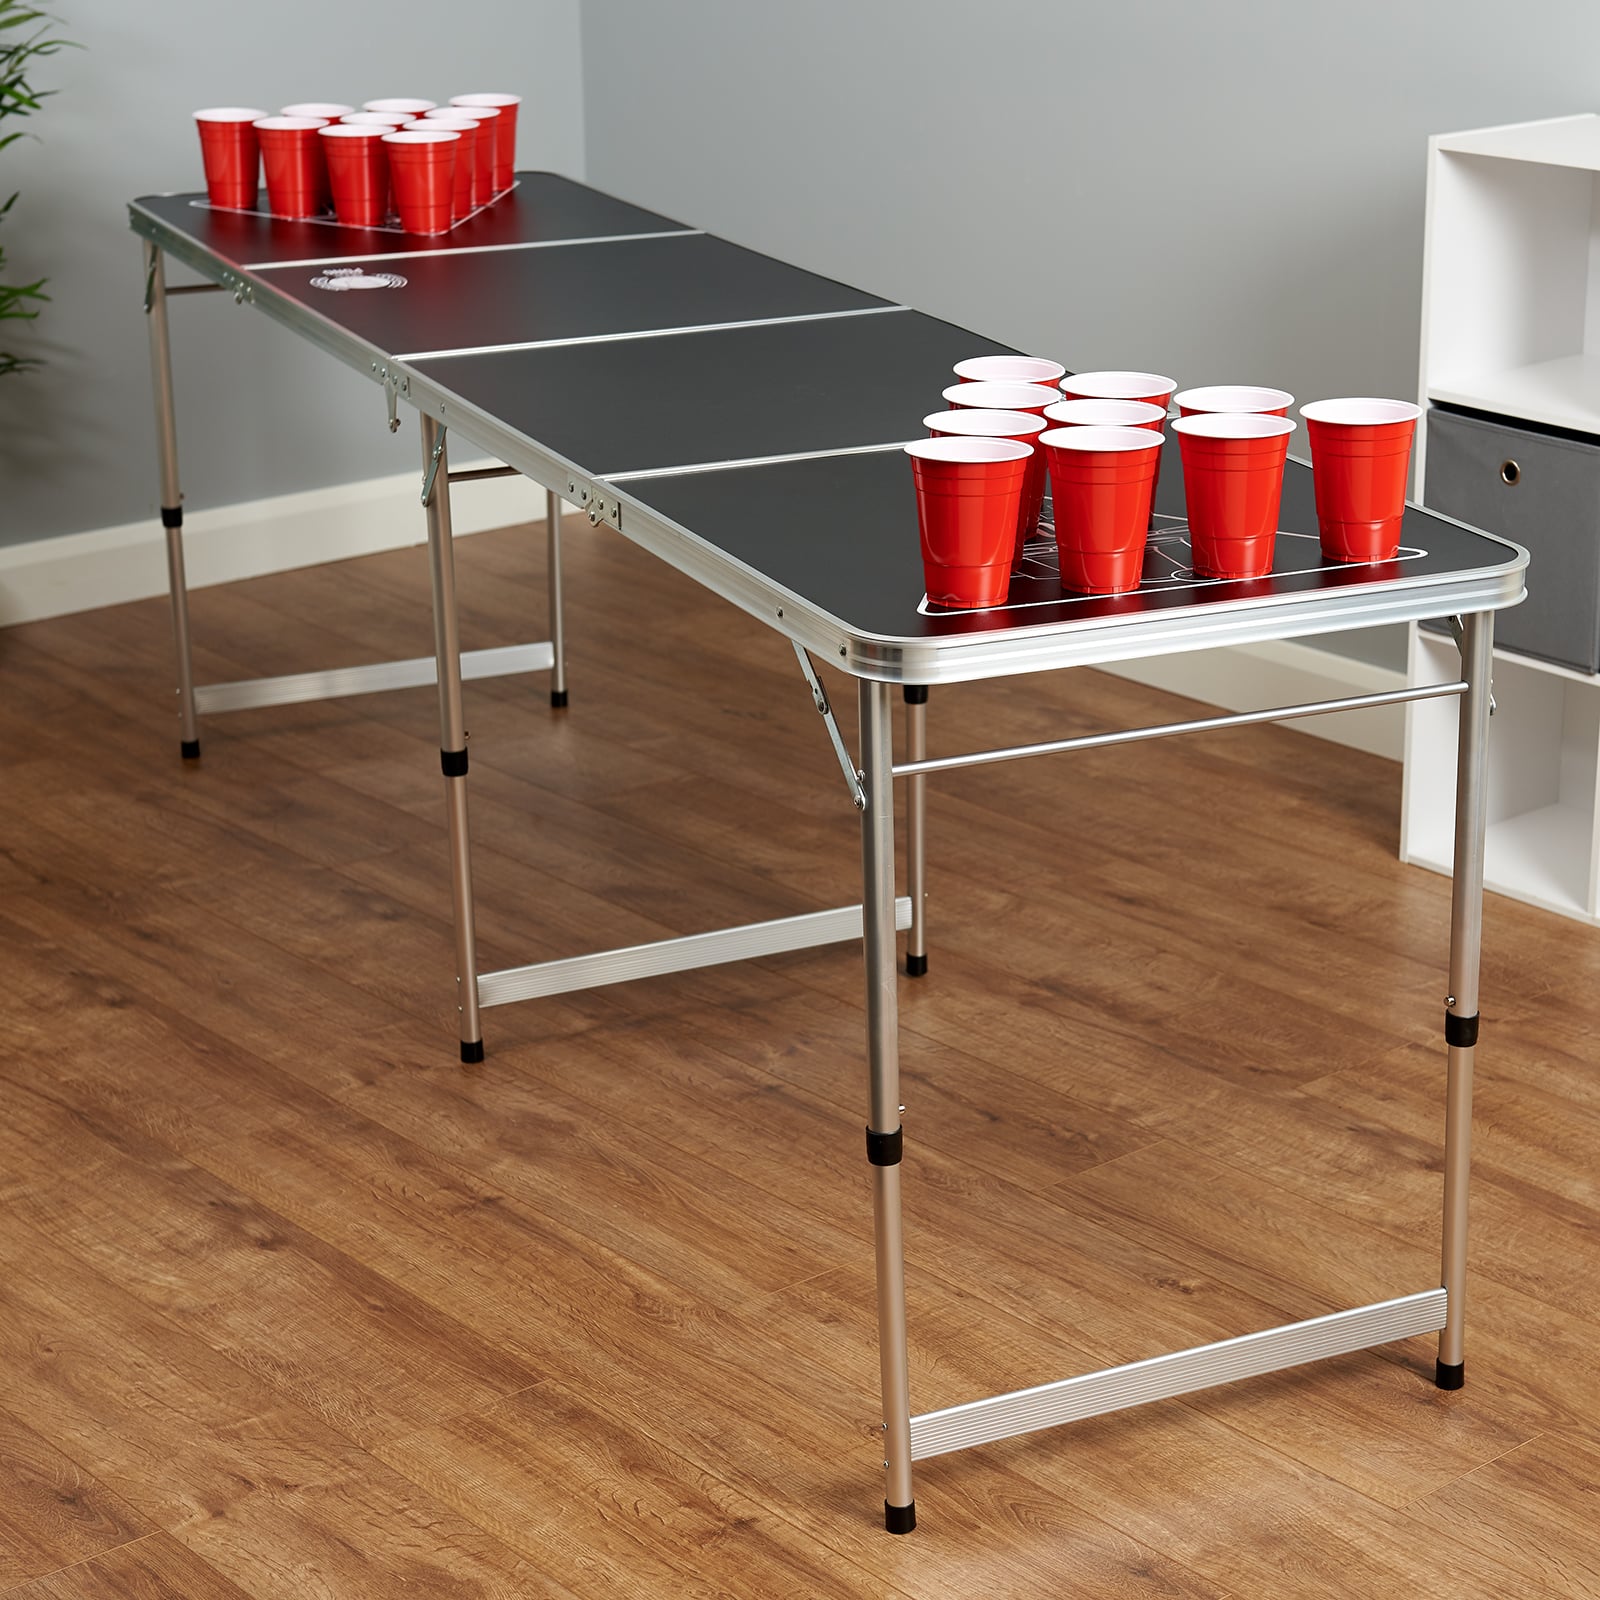 OFFICIAL SIZE 8 FOOT FOLDING BEER PONG TABLE BBQ/PARTY/DRINKING ...